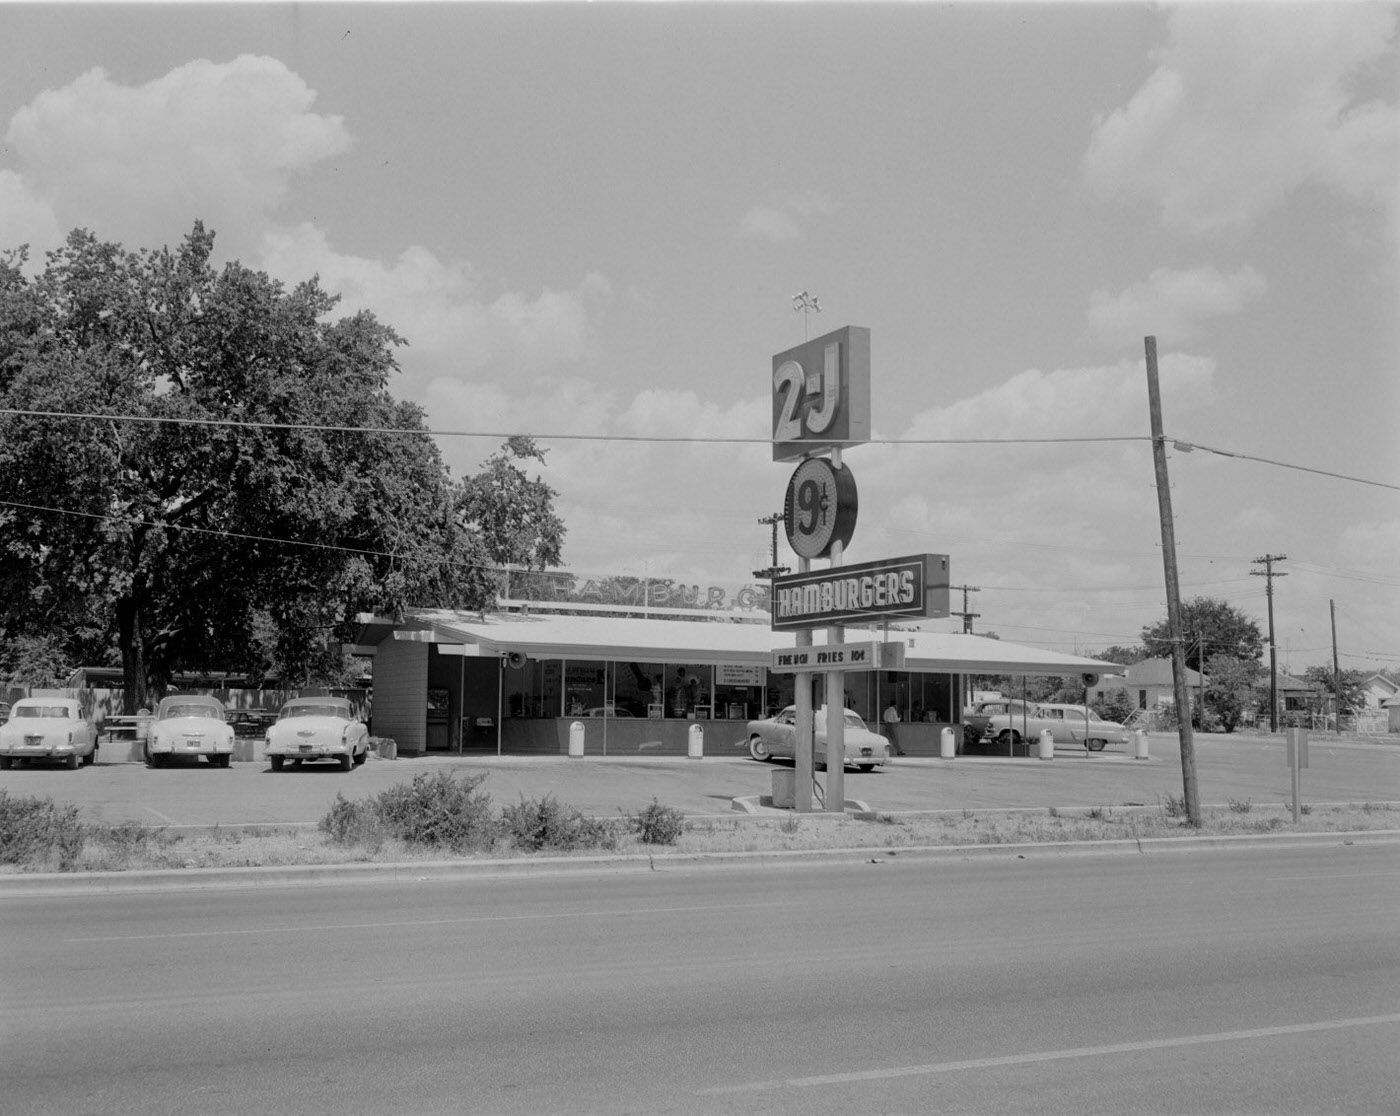 Exterior of 2-J Hamburger Store with Cars Parked, 1954.